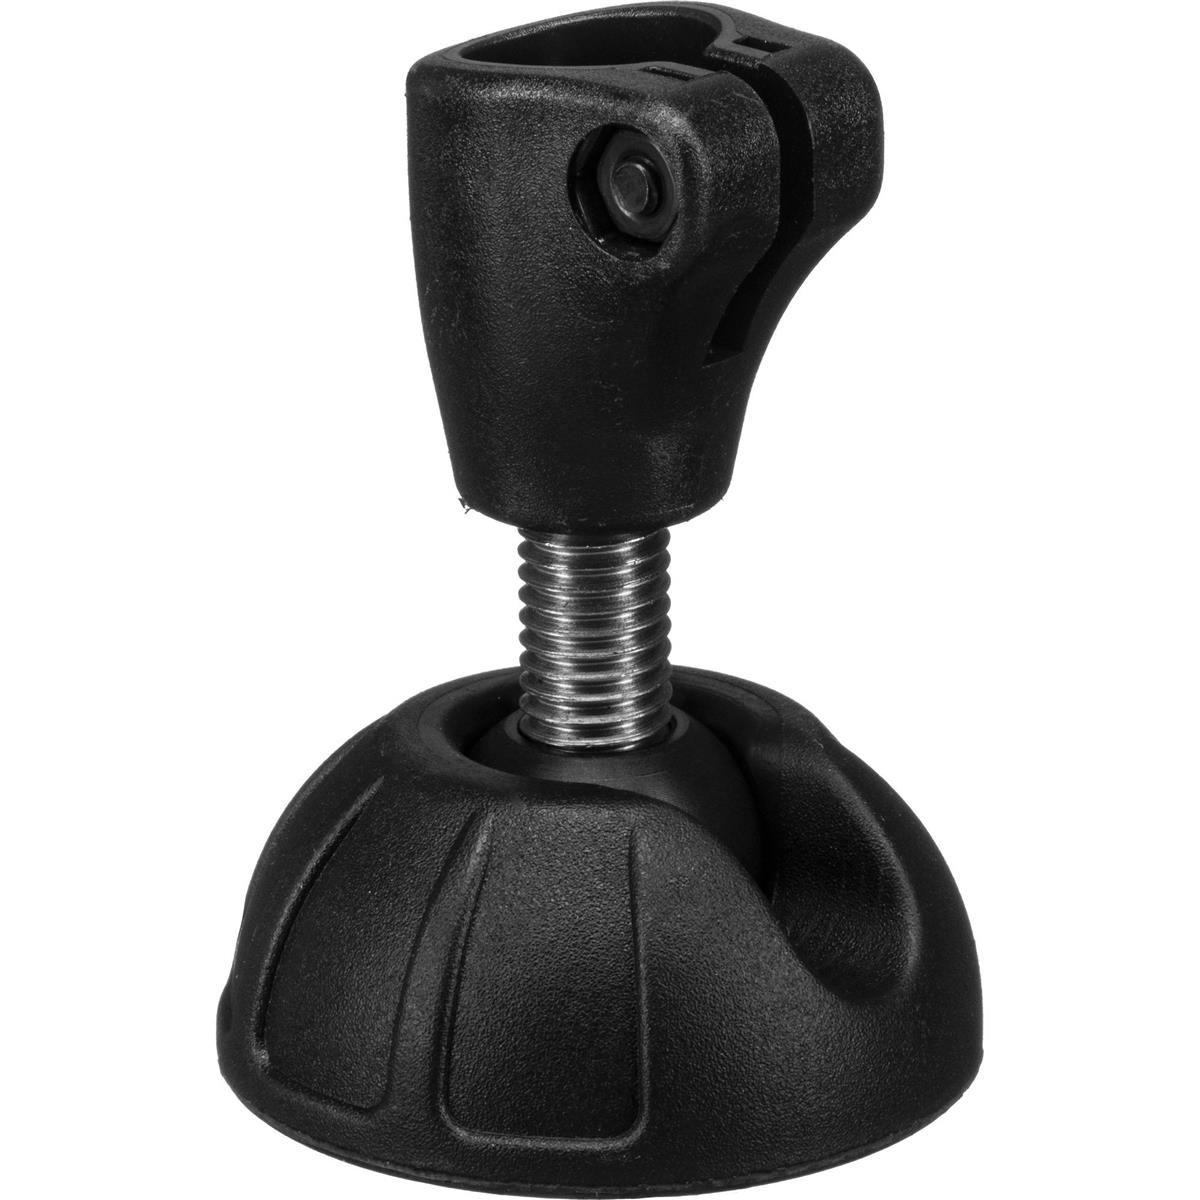 Image of Manfrotto 160SCK3 Rubber Suction Cup Feet